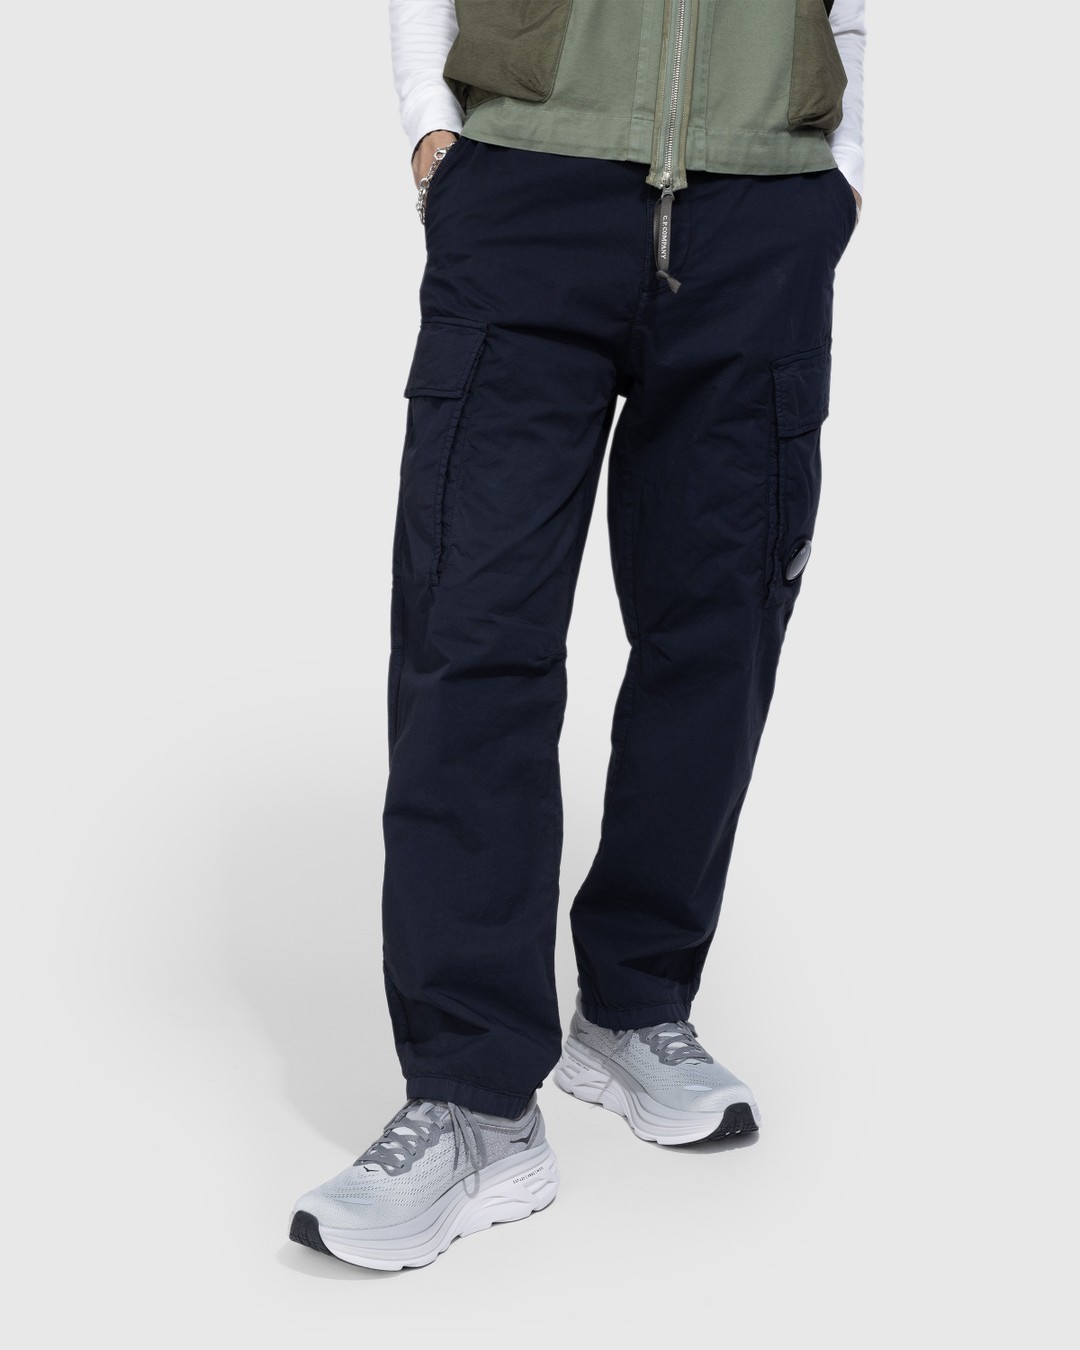 C.P. Company – Twill Stretch Cargo Pants Total Eclipse Blue - Pants - Blue - Image 2